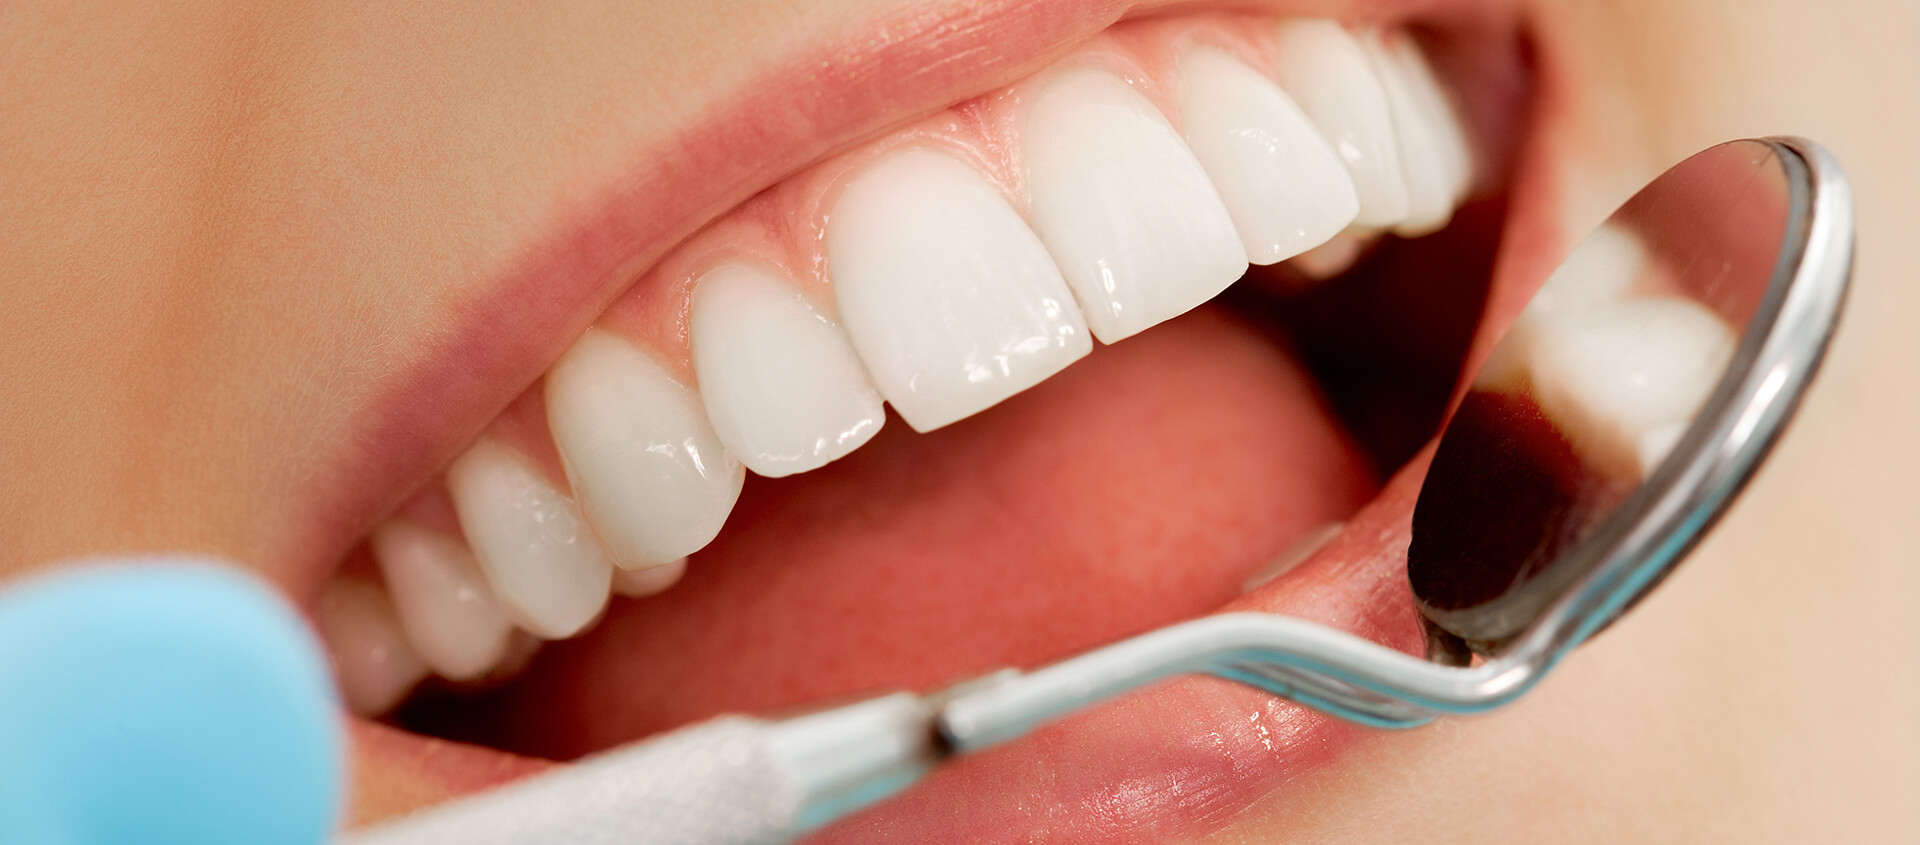 Are Stained Teeth Damaging Your Smile? A Teeth Whitening Dentist in Brandon, FL Can Help